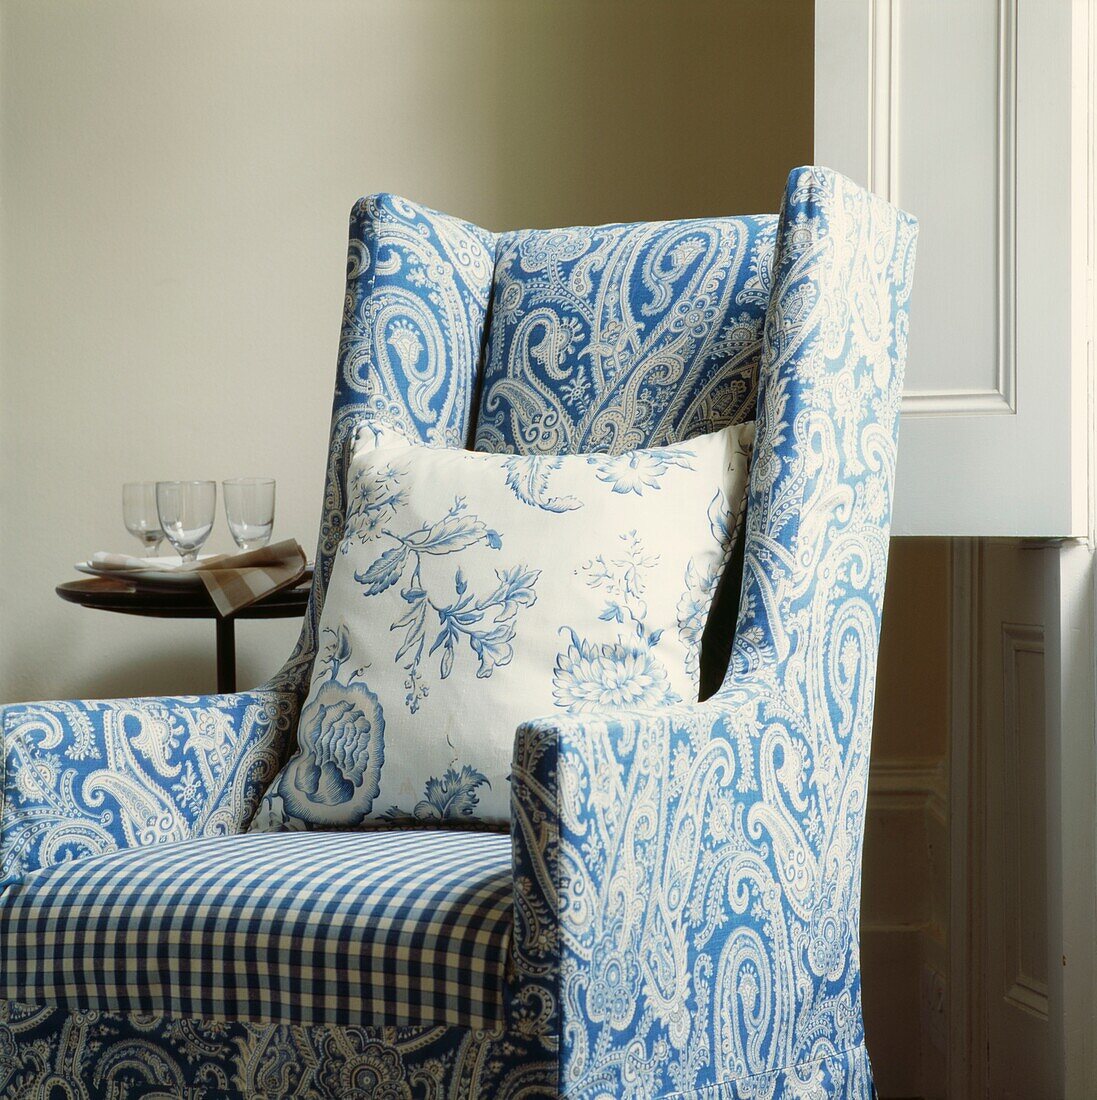 Blue paisley armchair with contrasting cushion and side table at window